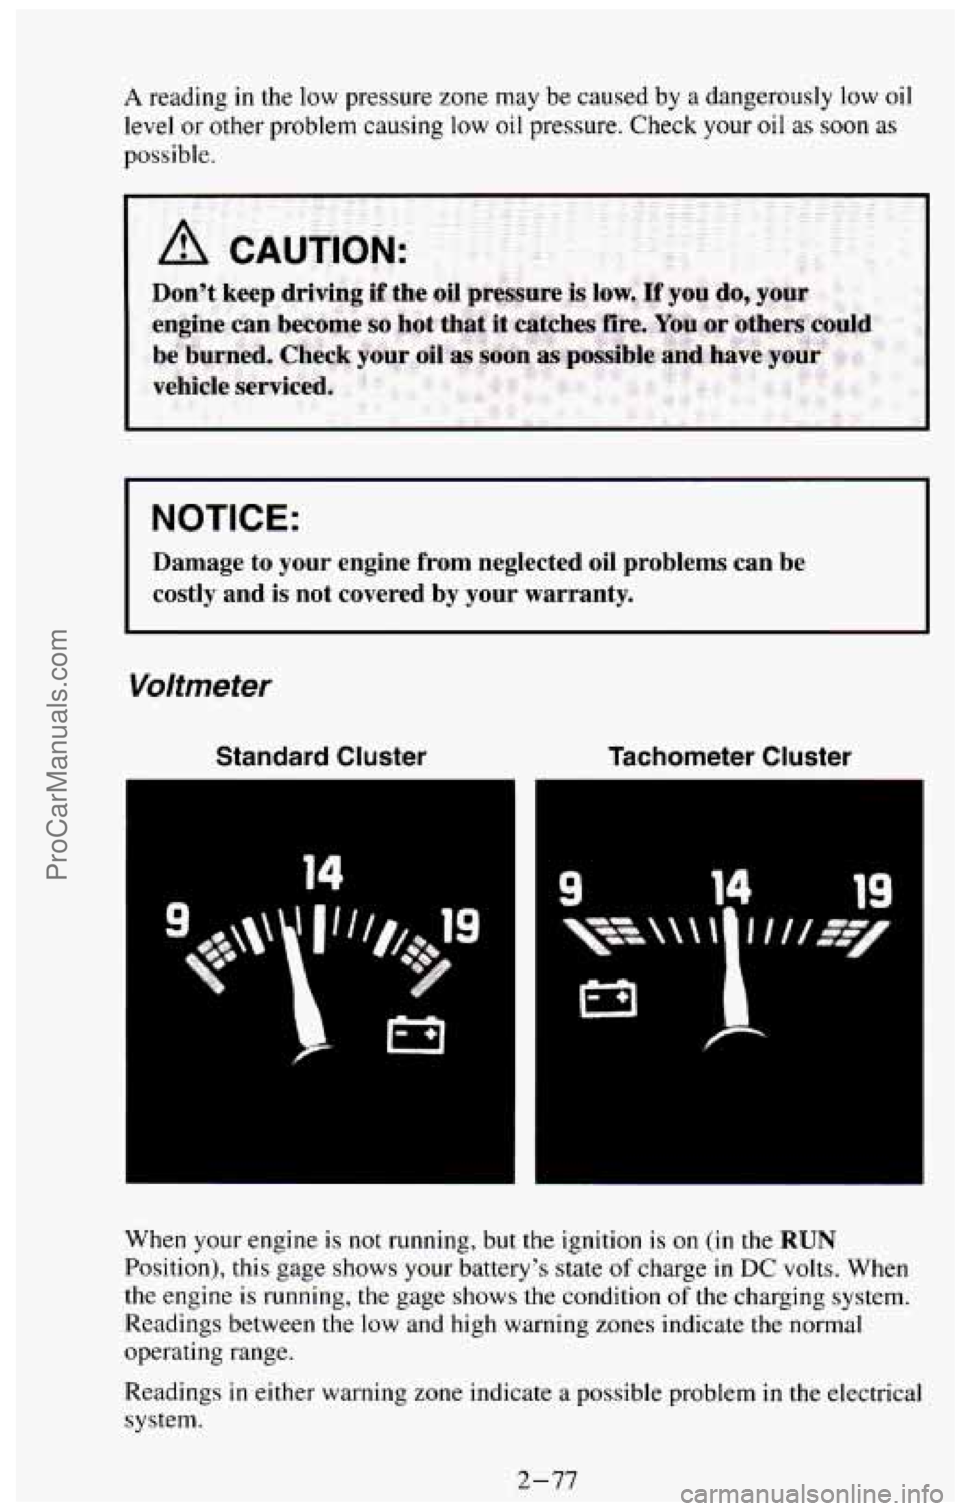 CHEVROLET SUBURBAN 1994  Owners Manual A reading in the low pressure zone may be caused  by a dangerously  low oil 
level or other  problem  causing low oil pressure. Check  your oil as soon as 
possible. 
I NOTICE: 
Damage  to  your  engi